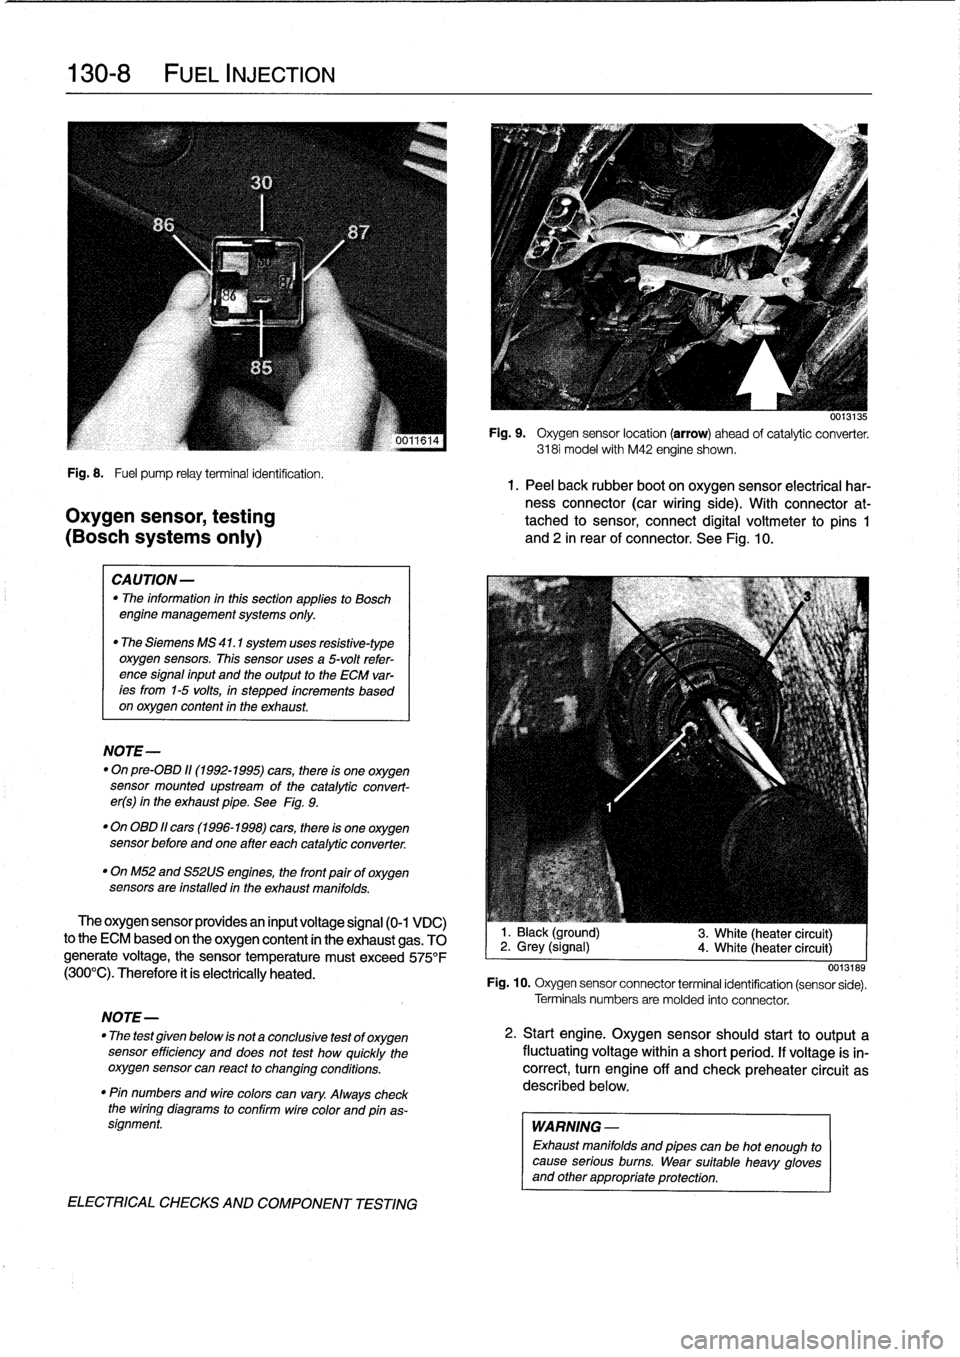 BMW 318i 1994 E36 Workshop Manual 
130-
8

	

FUEL
INJECTION

Fig
.
8
.

	

Fuel
pump
relayterminal
identification
.
1.
Peel
back
rubber
boot
on
oxygen
sensor
electrical
har-
ness
connector
(car
wiring
side)
.
With
connector
at-
Oxyge